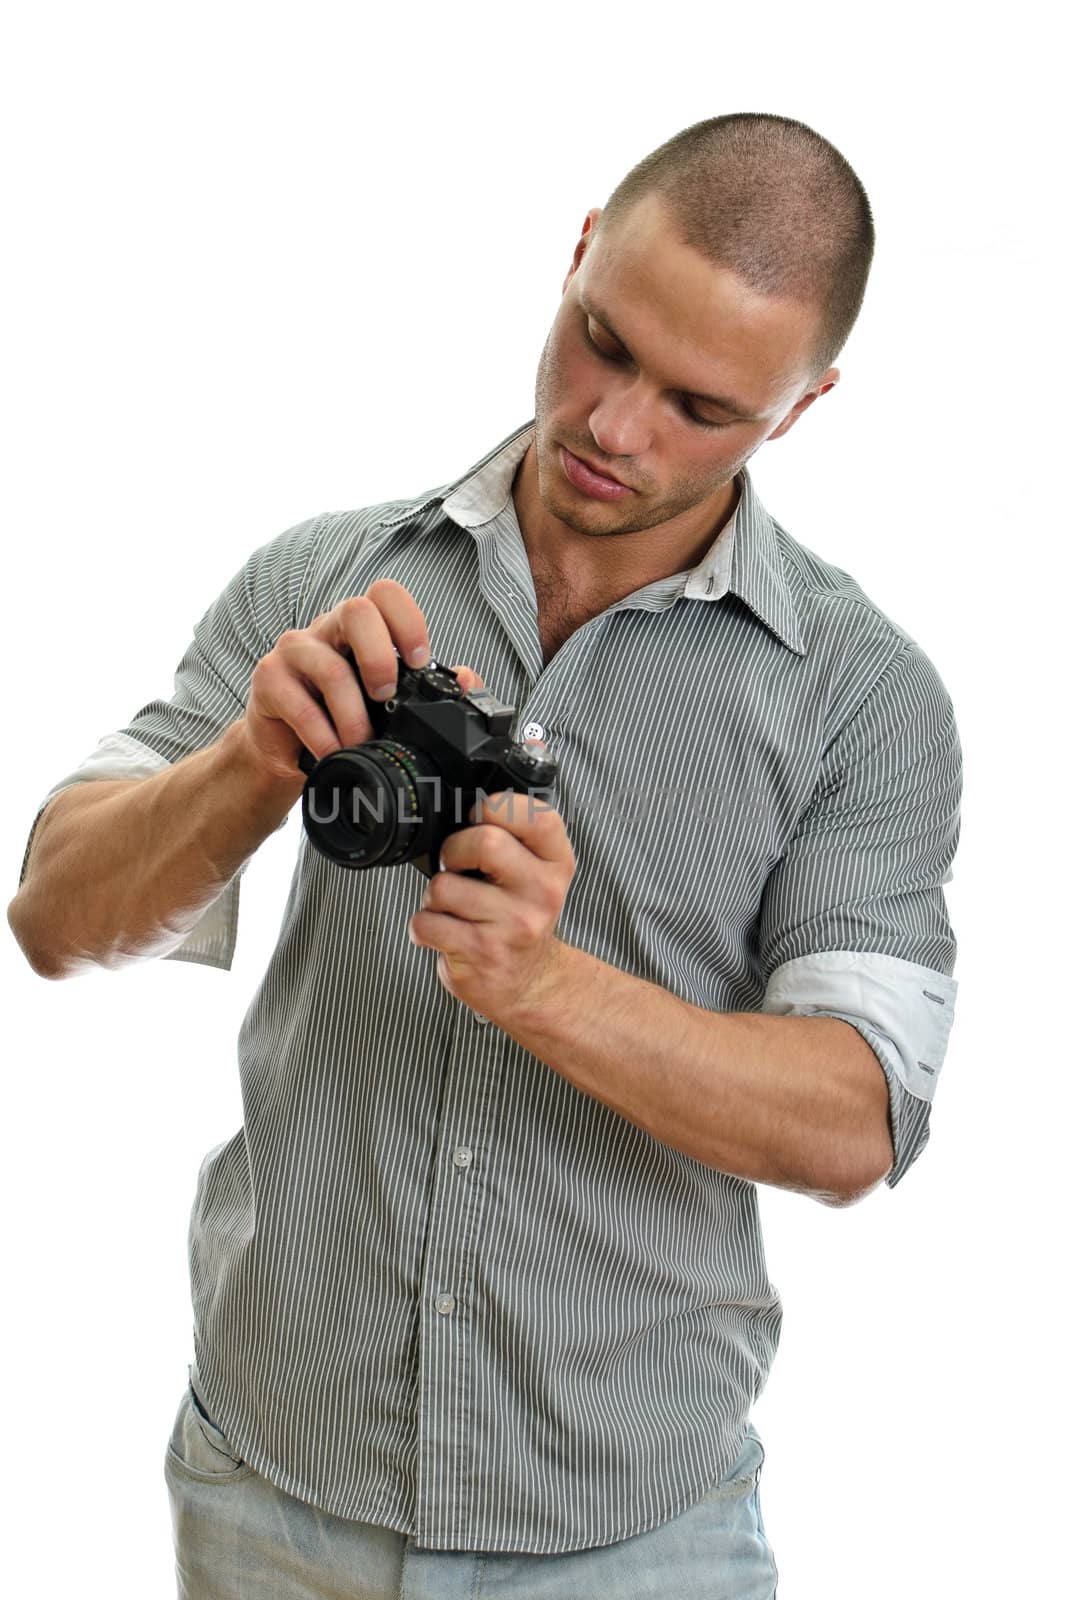 Man taking pictures with retro camera. Isolated on white.